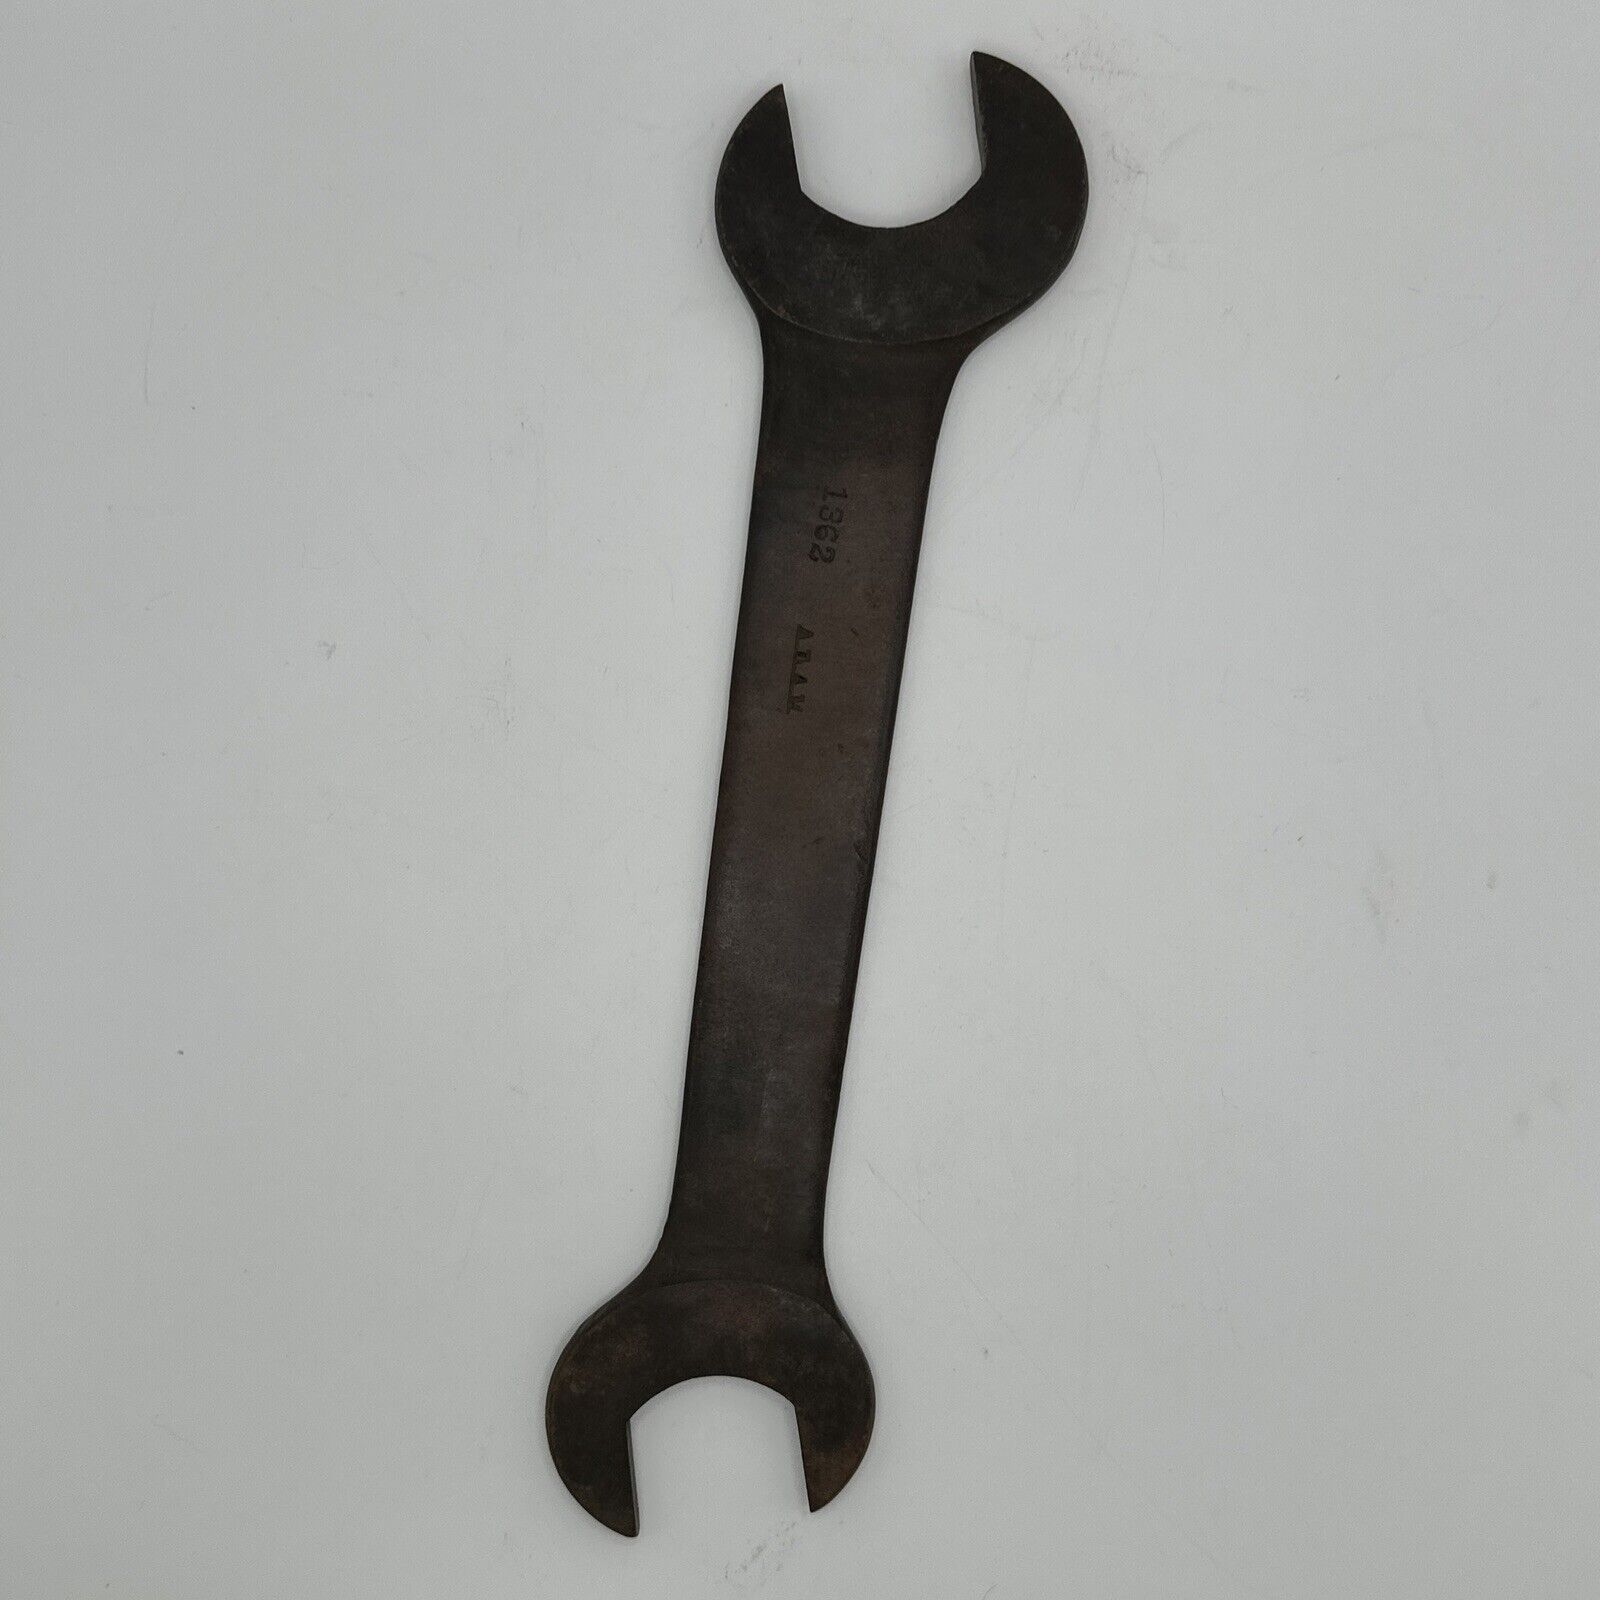 Billings & Spencer Co No 1362 1-1/8” X 1-1/4” Double Open Tappet Wrench Antique